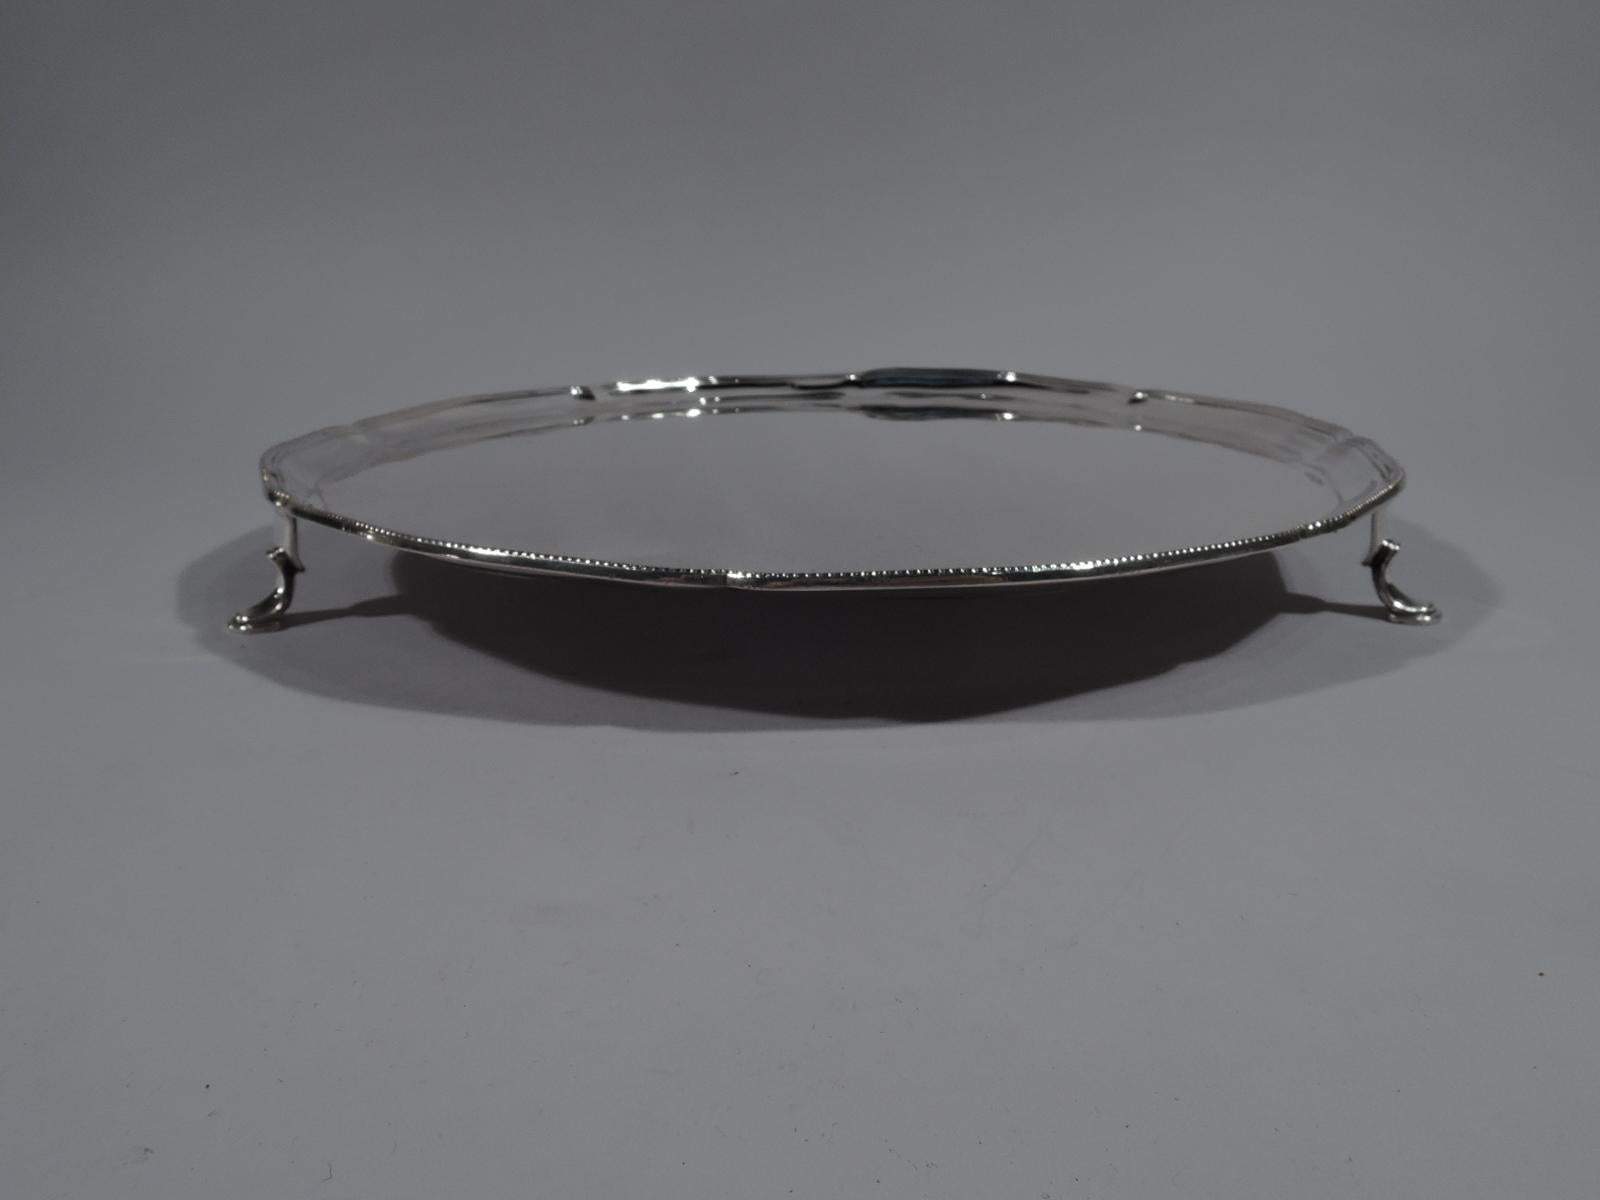 George V sterling silver salver. Made by Lionel Alfred Crichton in London in 1930. Round with shallow lobes and beaded rim. Three hoof supports. An elegant serving piece in perennially popular neoclassical. Fully marked. Weight: 26 troy ounces.